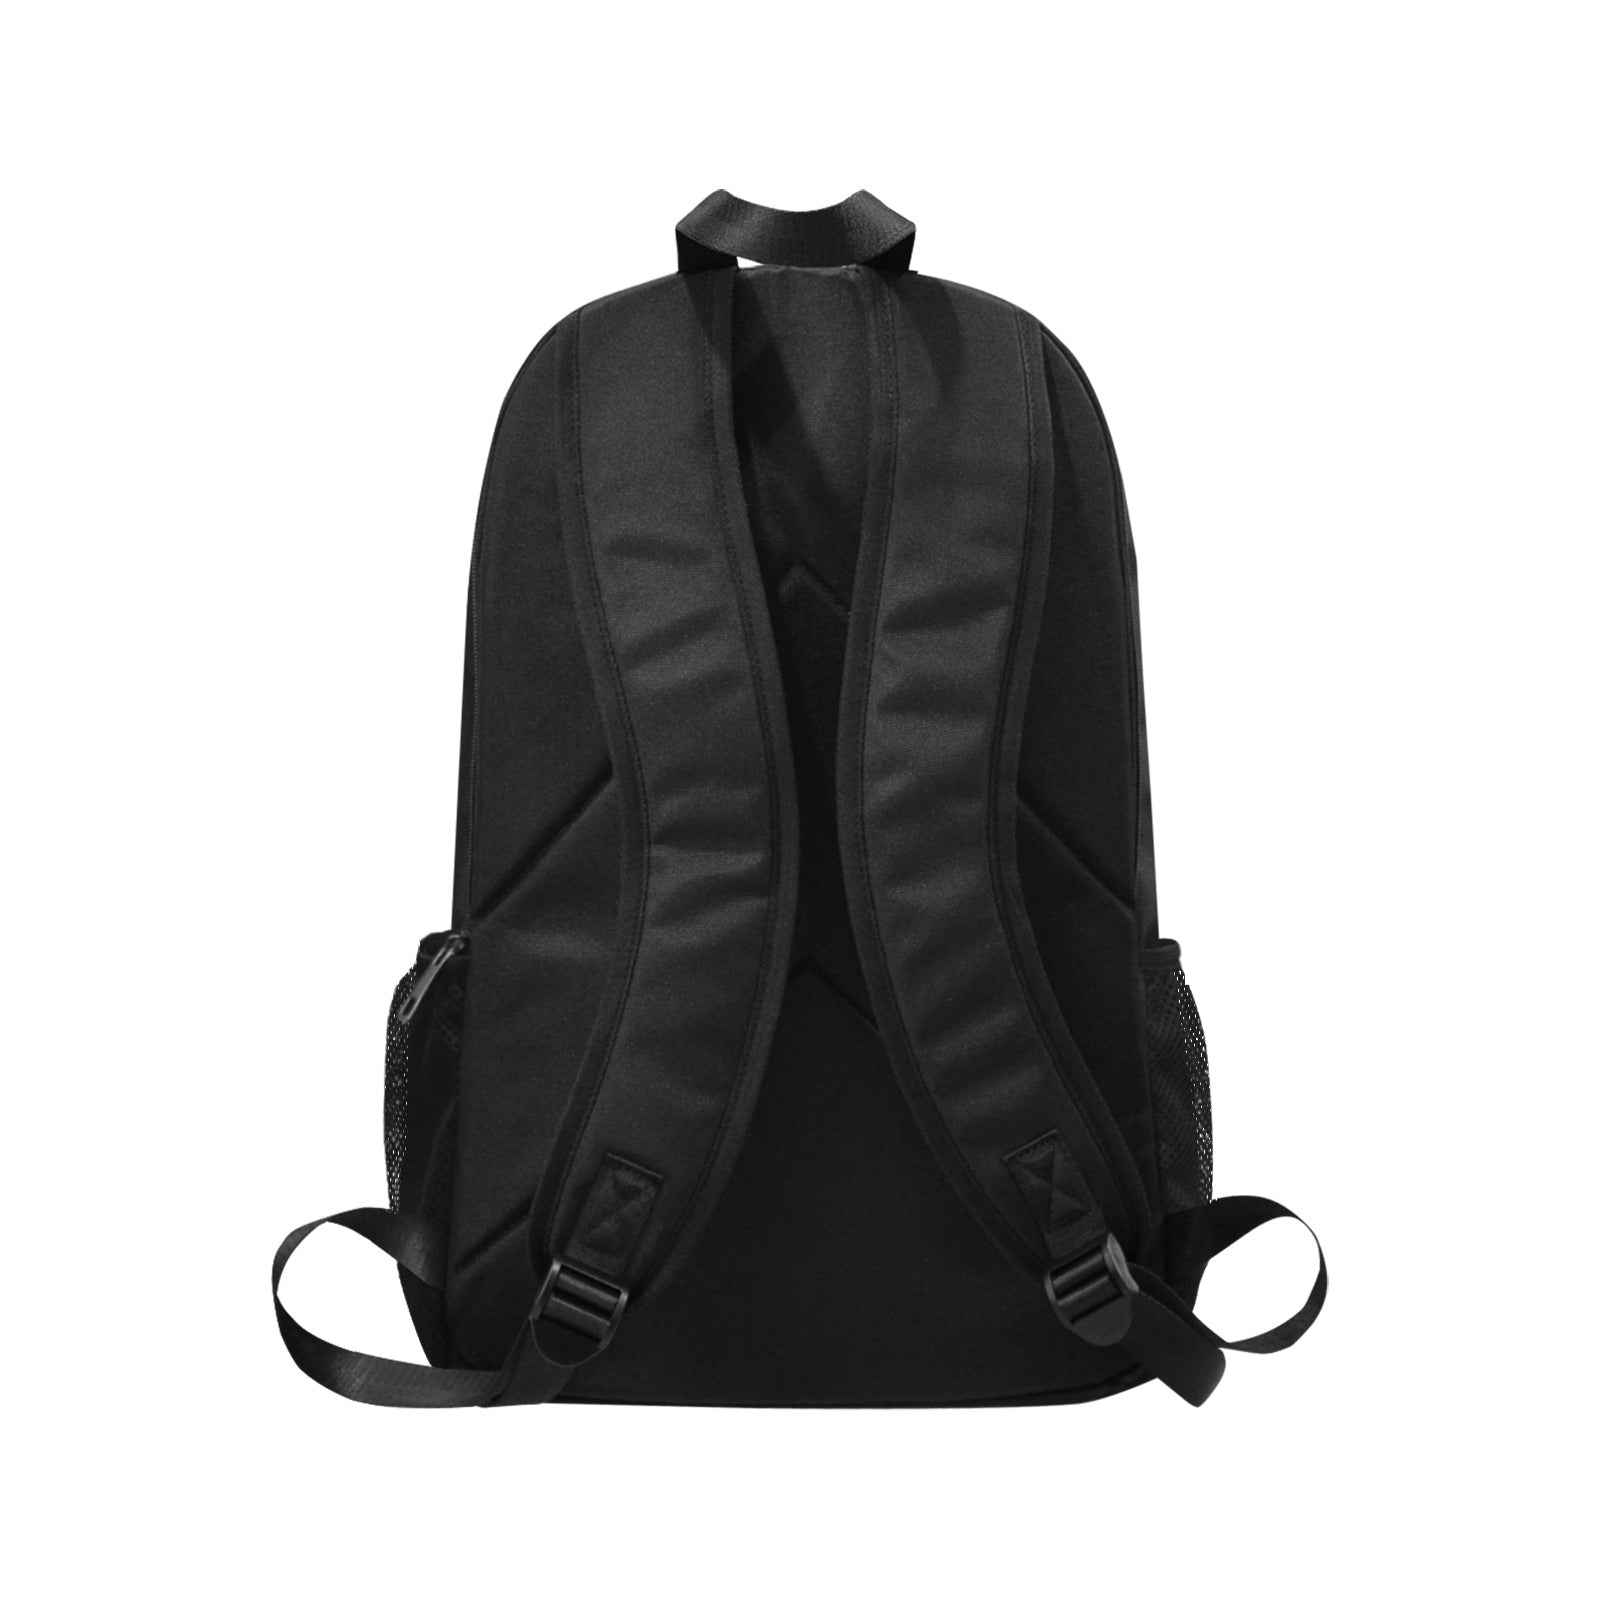 Fix My Crown Fabric Backpack with Side Mesh Pockets